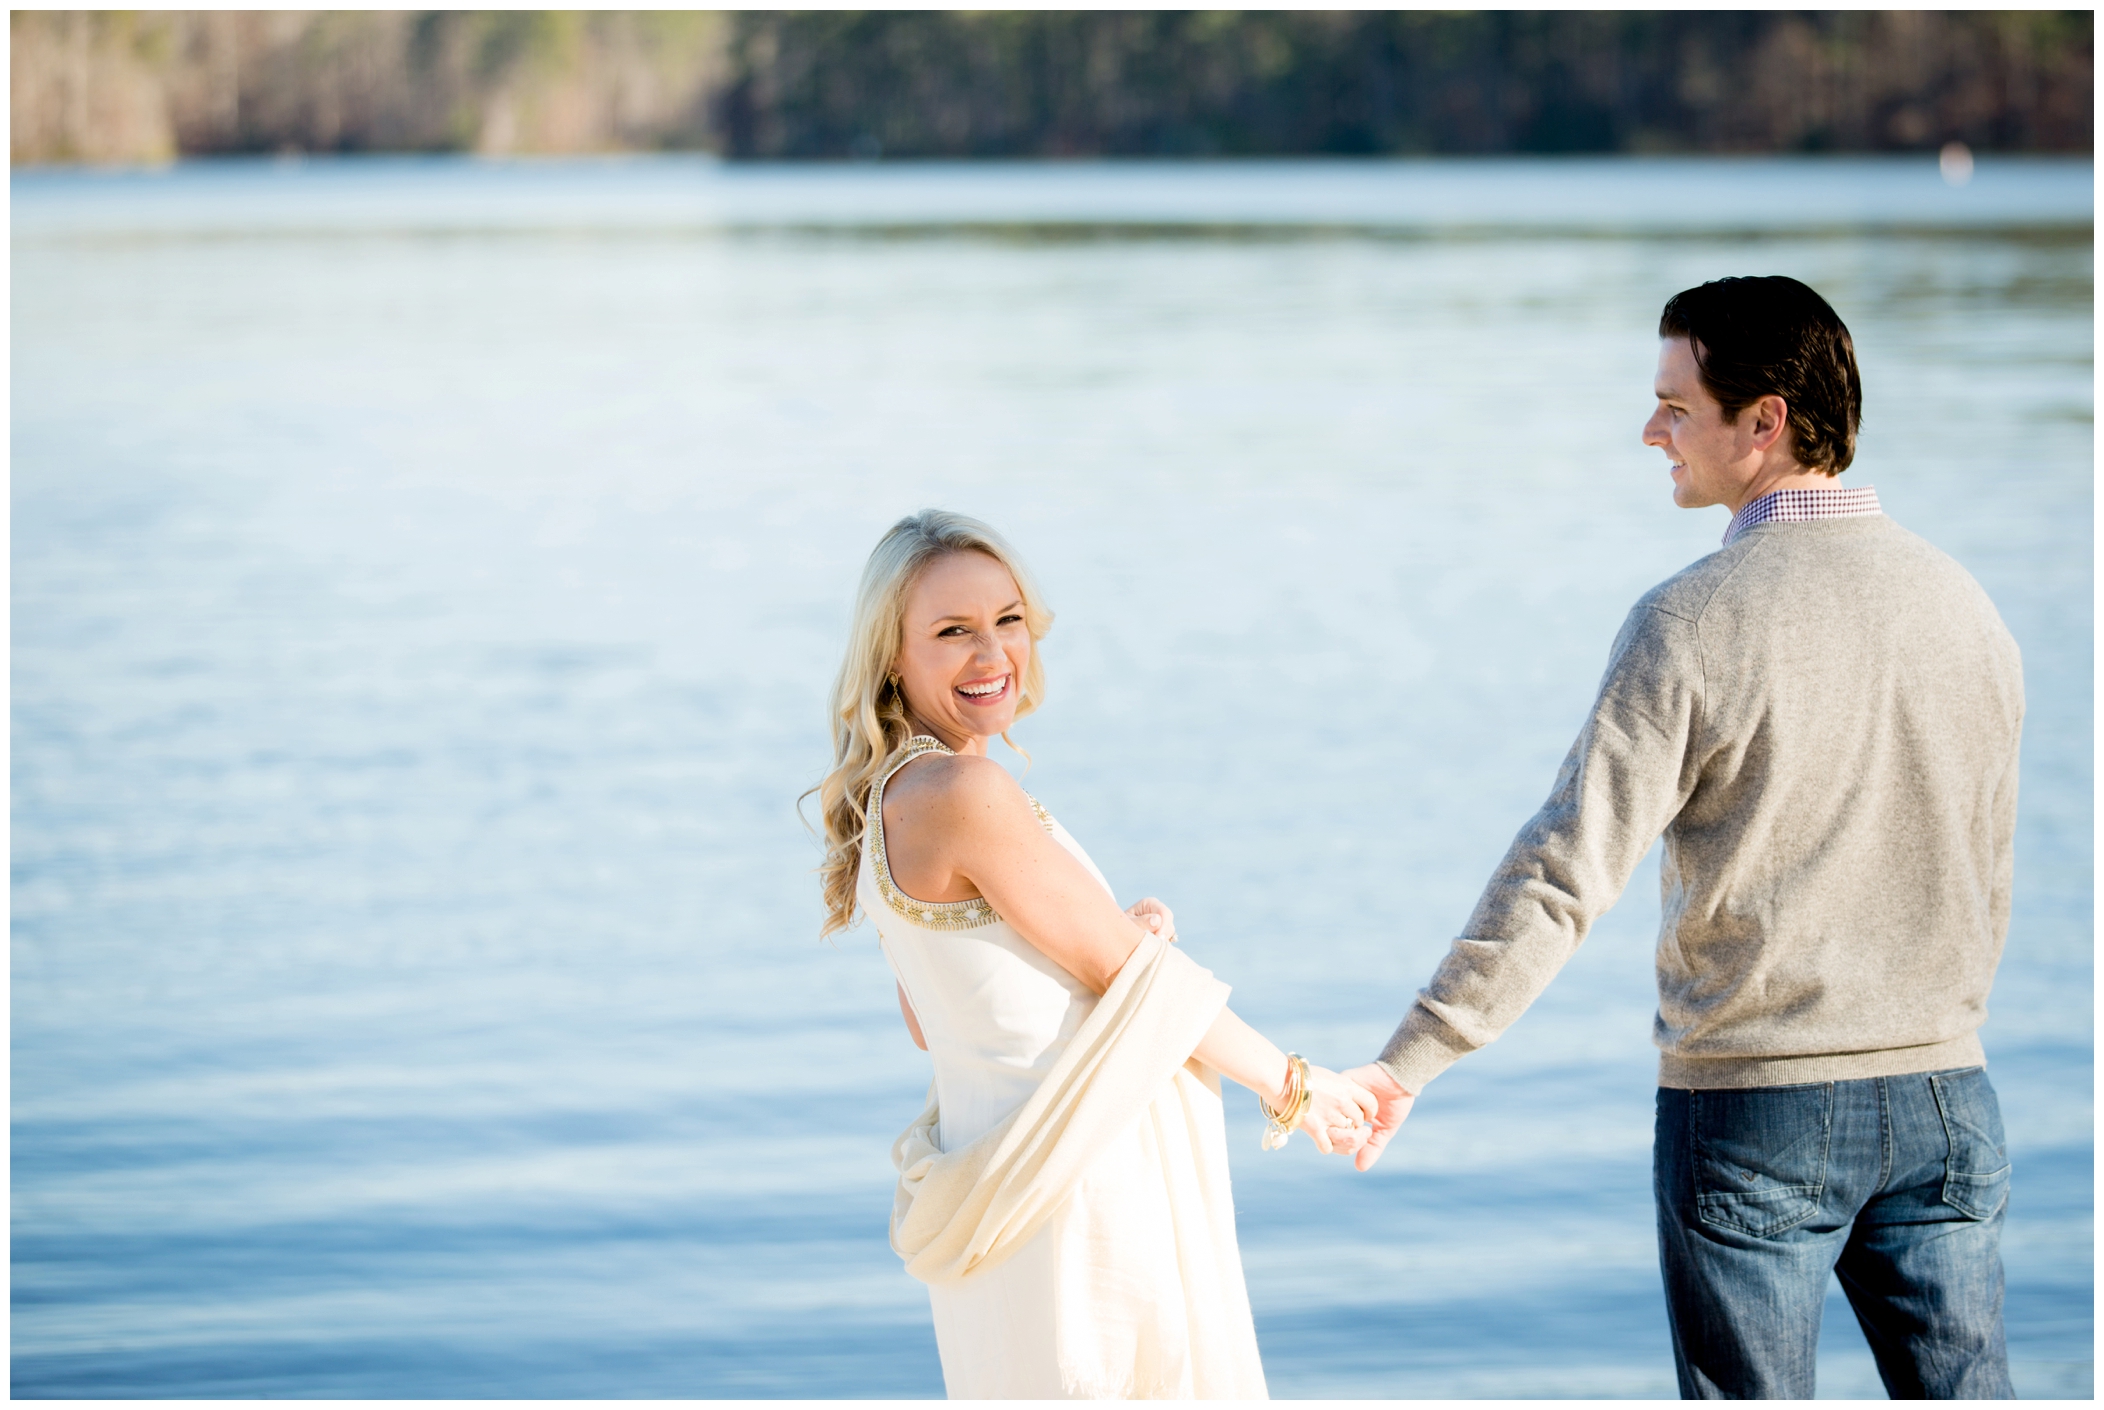 picture of lake engagement photos